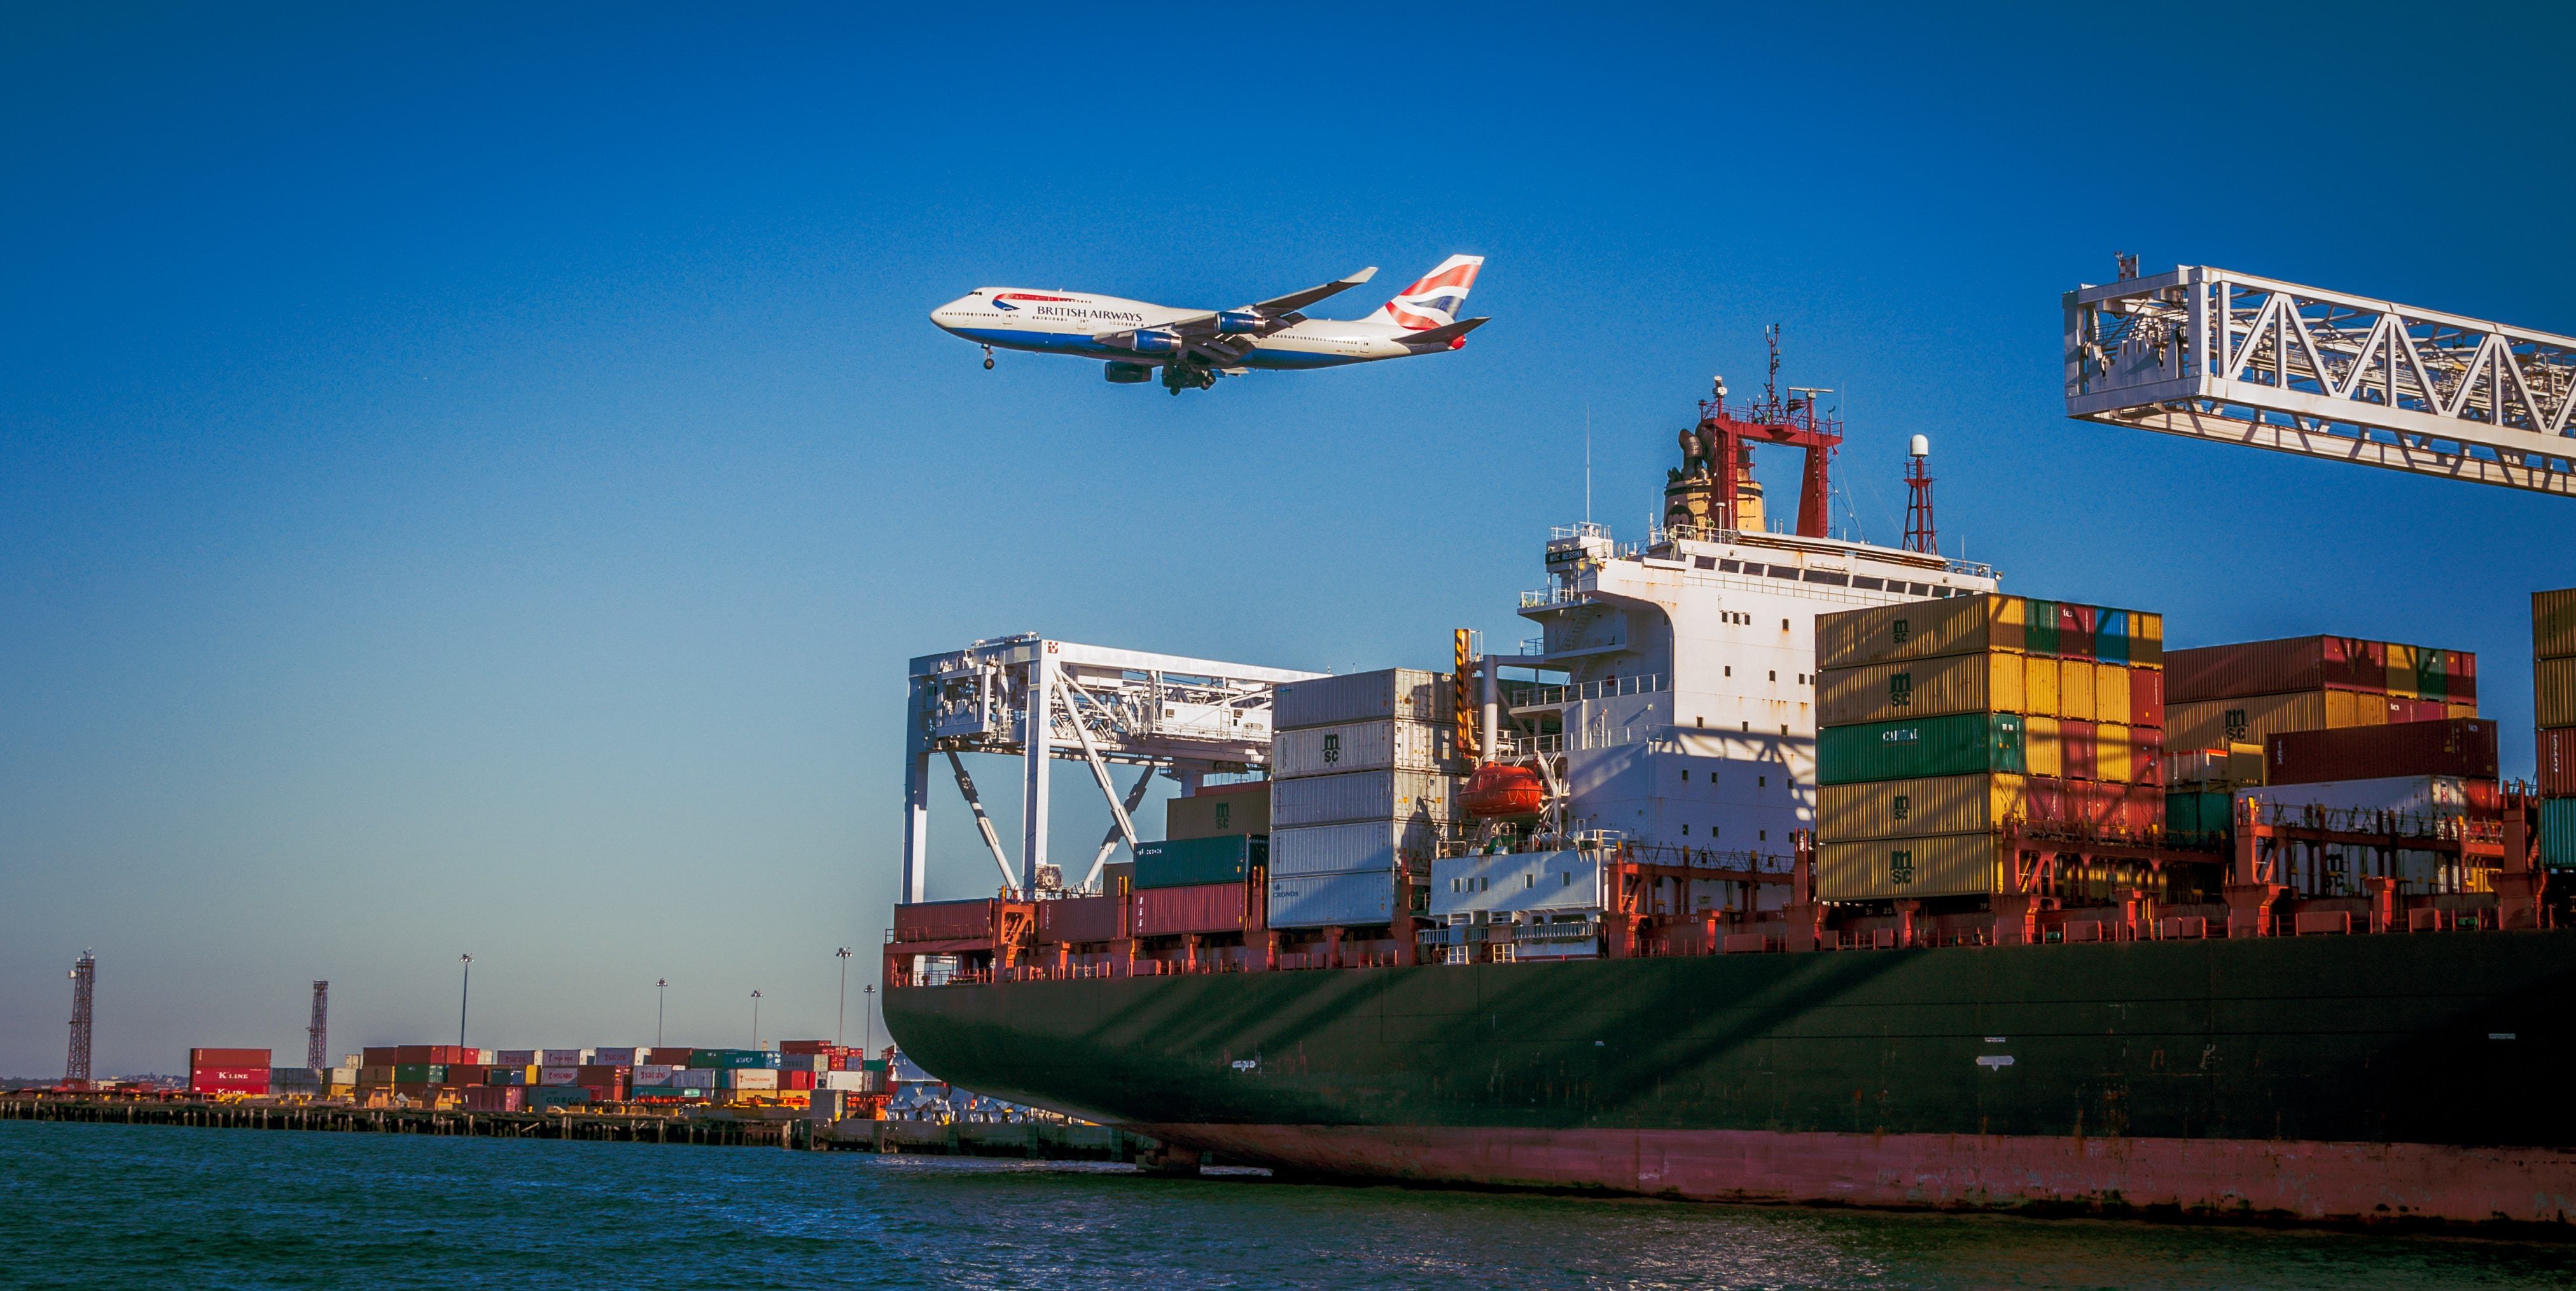 Large shipping ship with a plane flying in the background